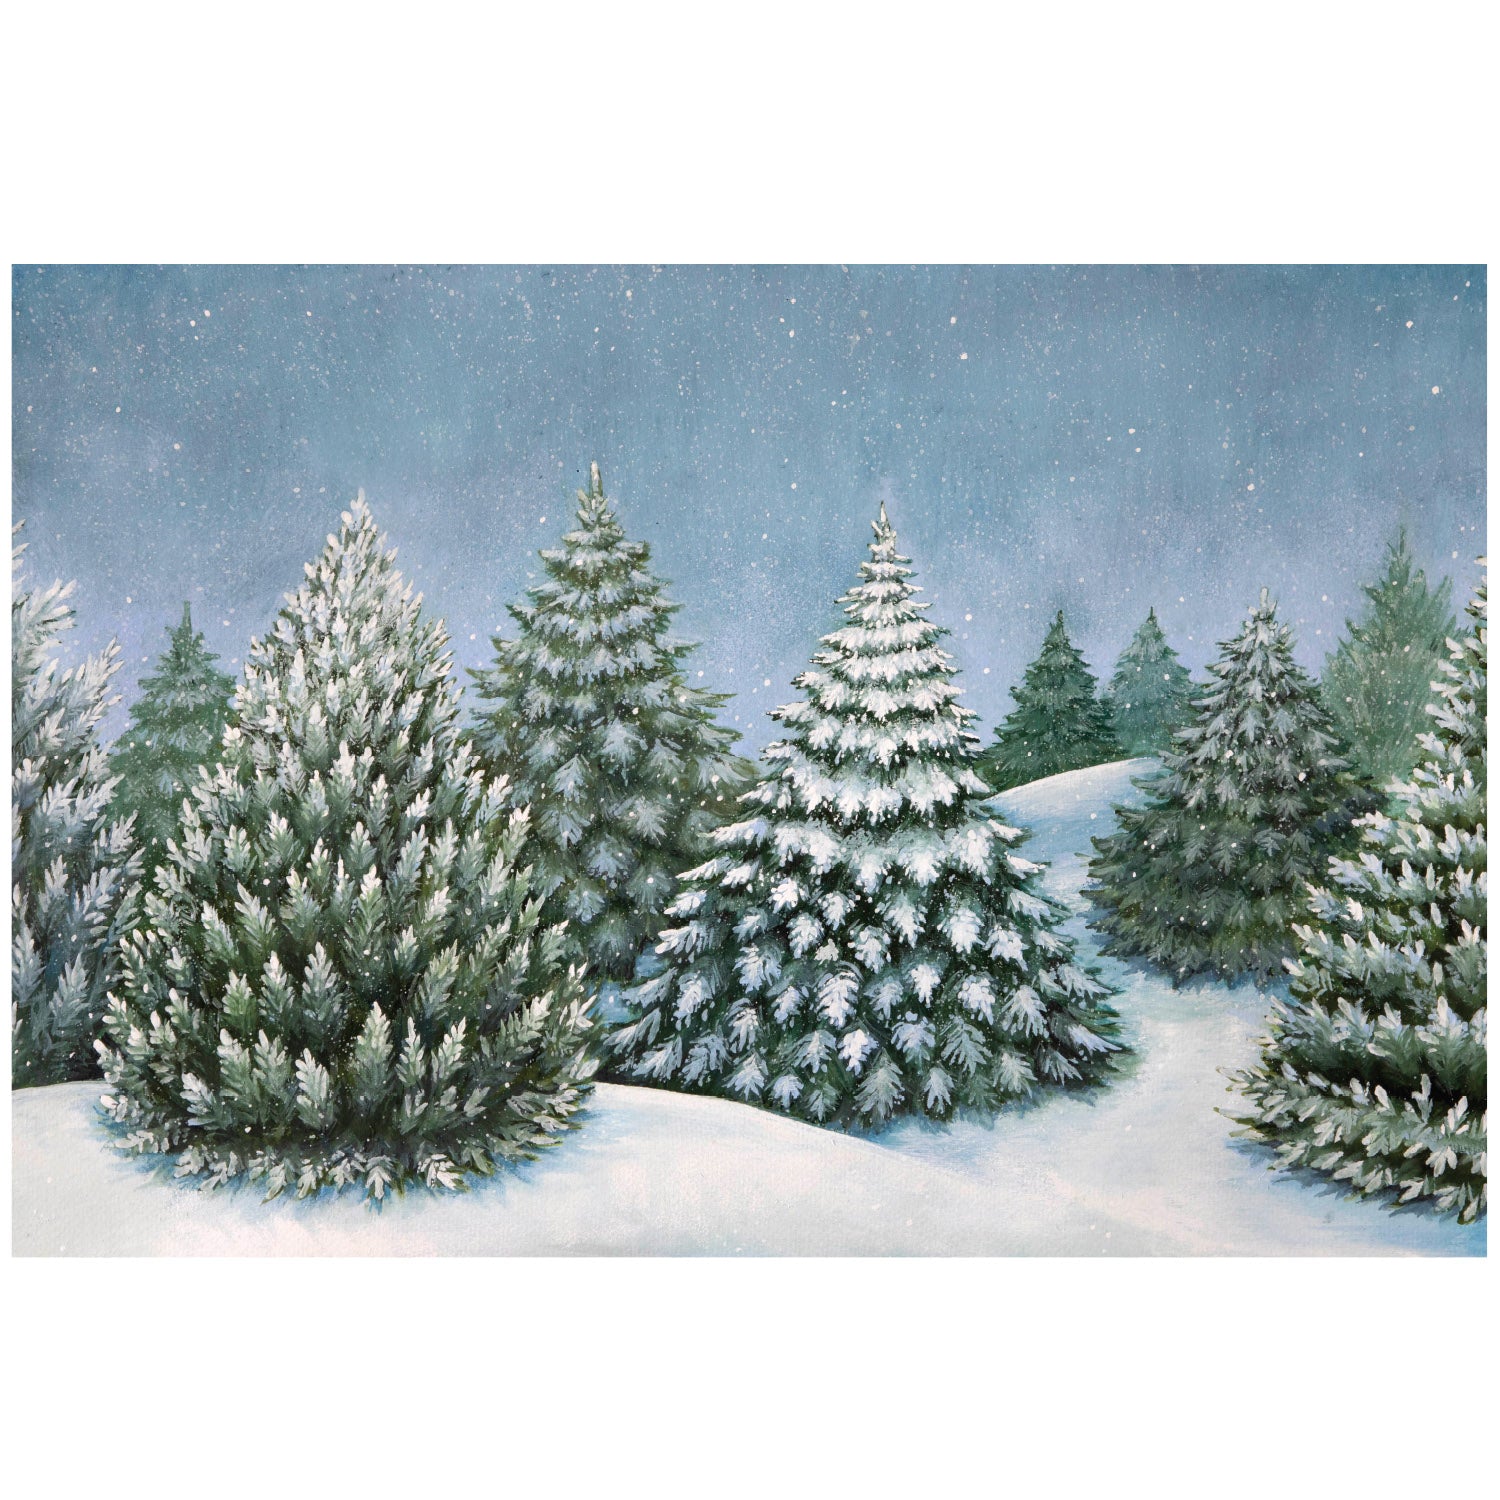 An illustration of delicately frosted evergreen trees in a snowy landscape, under a dusky blue sky scattered with falling snowflakes.